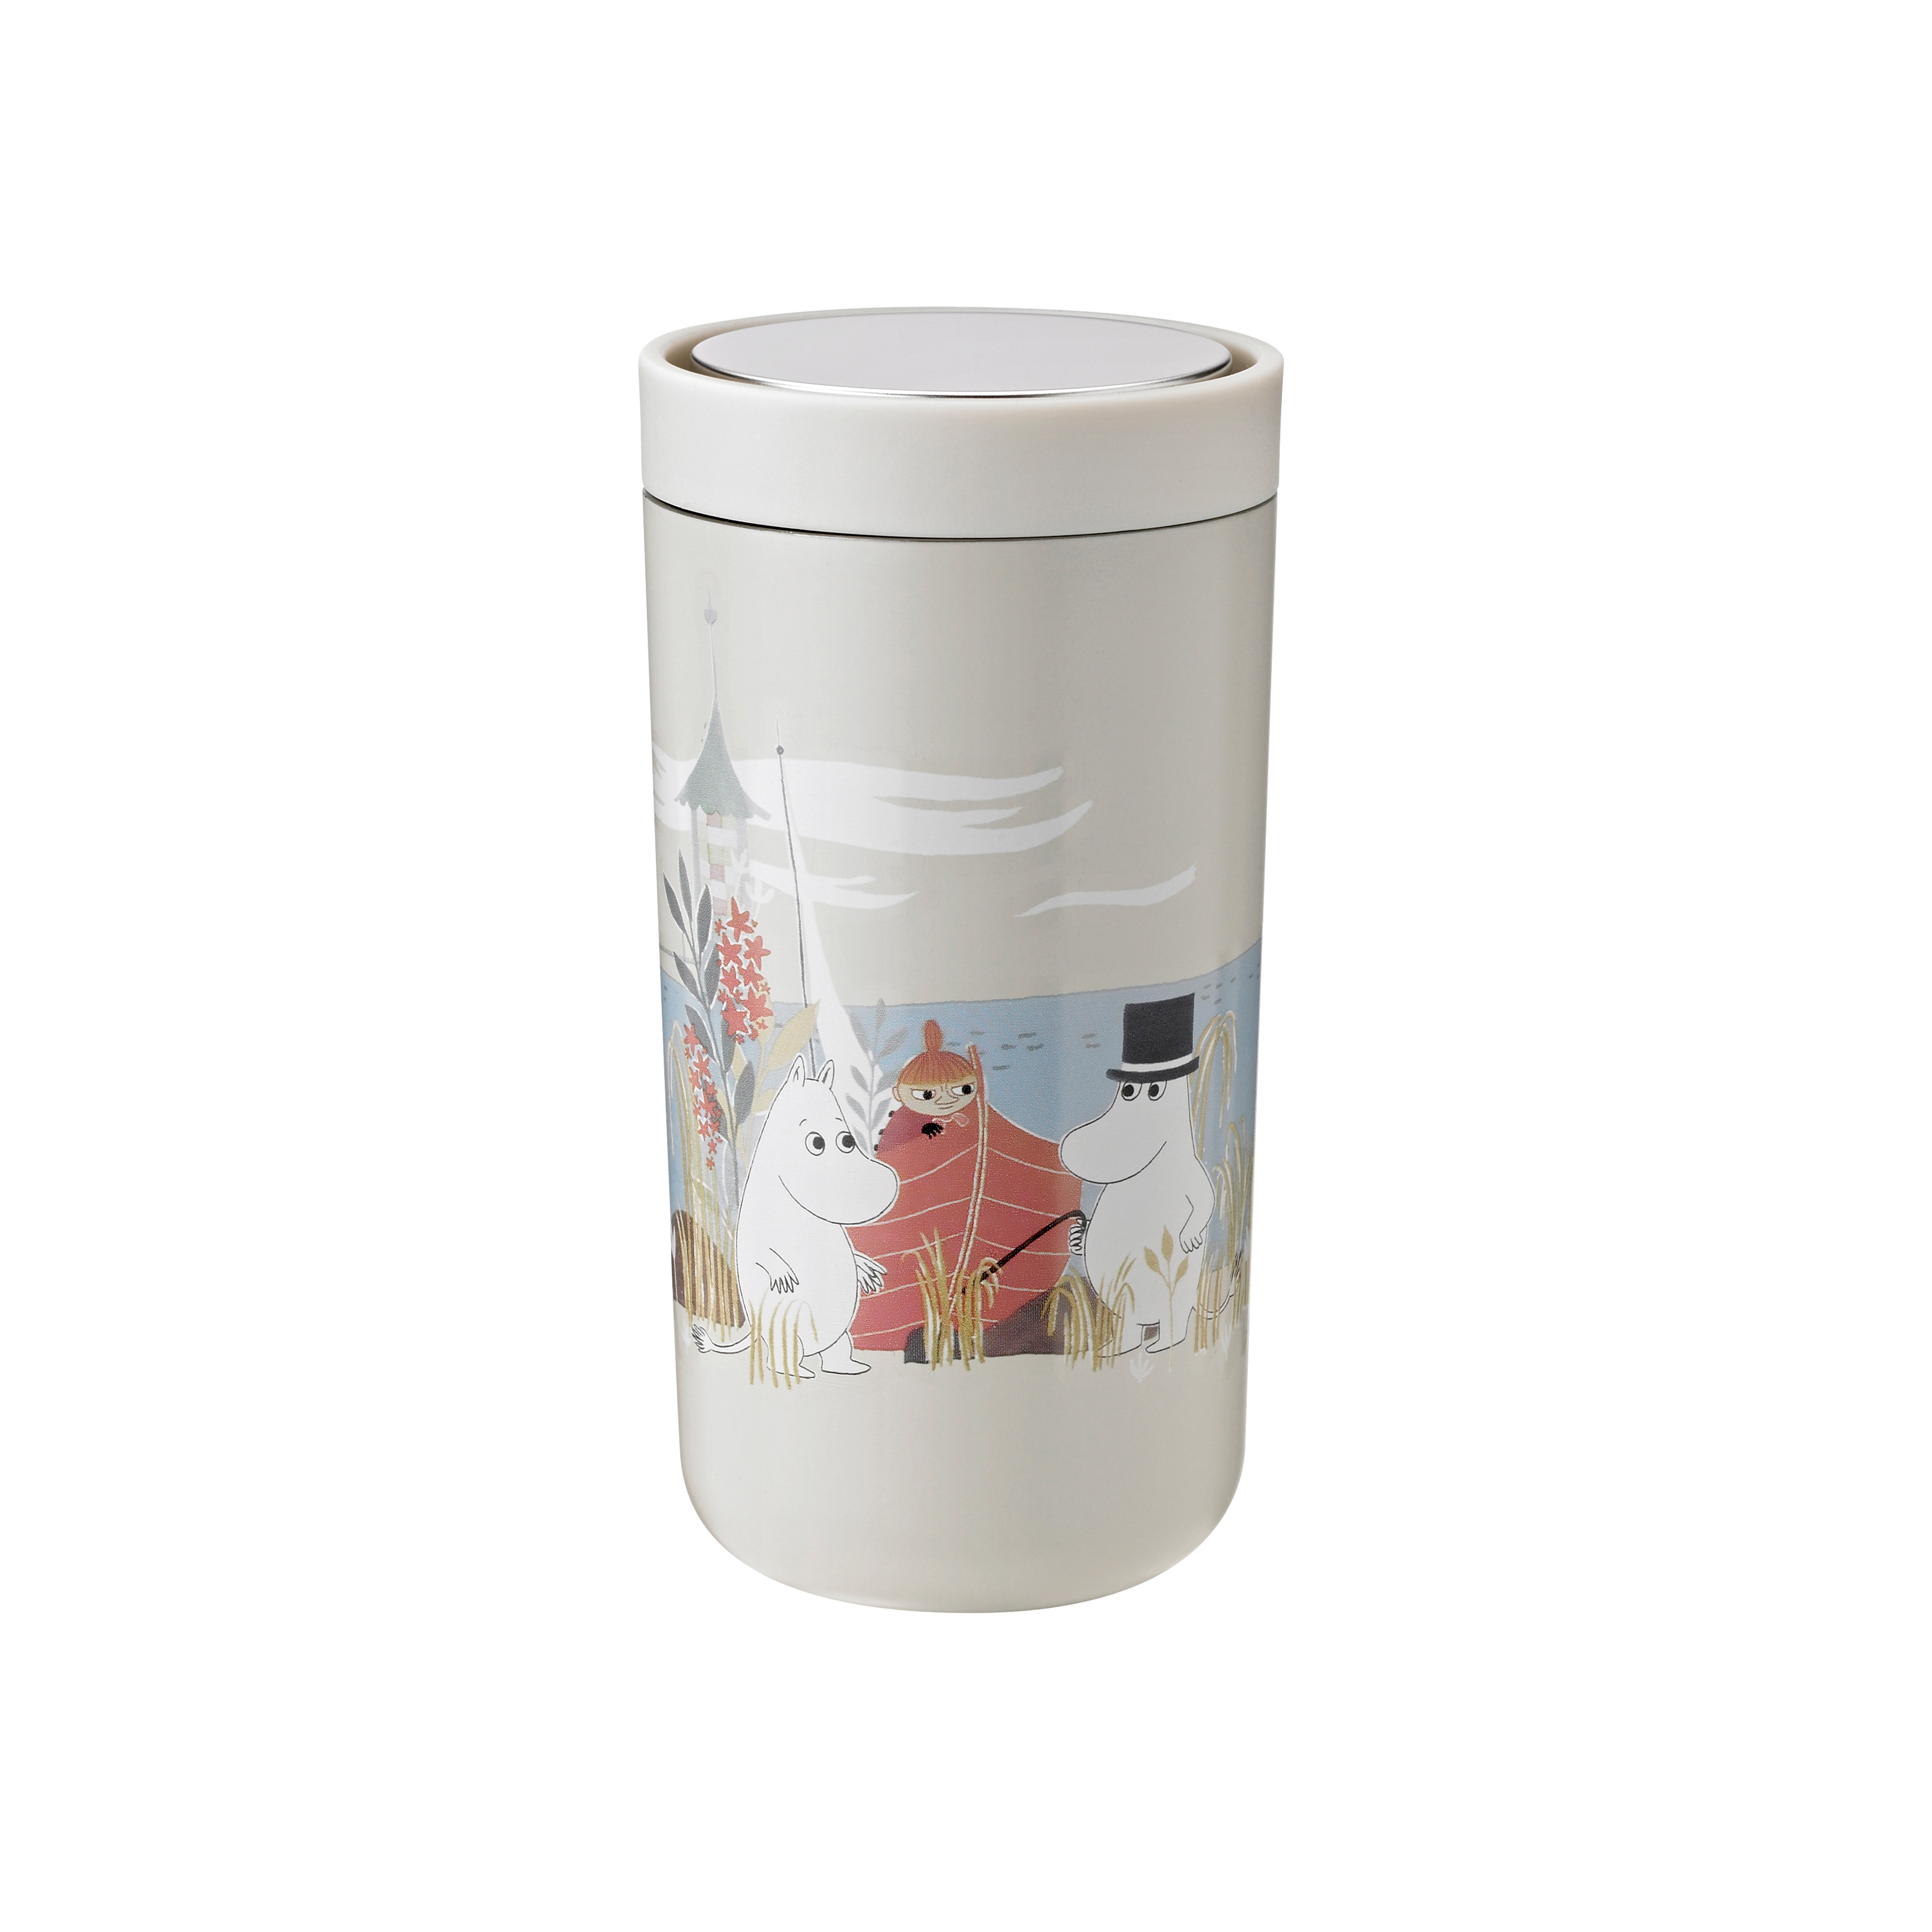 Stelton - To Go Click to go cup 6.8 oz